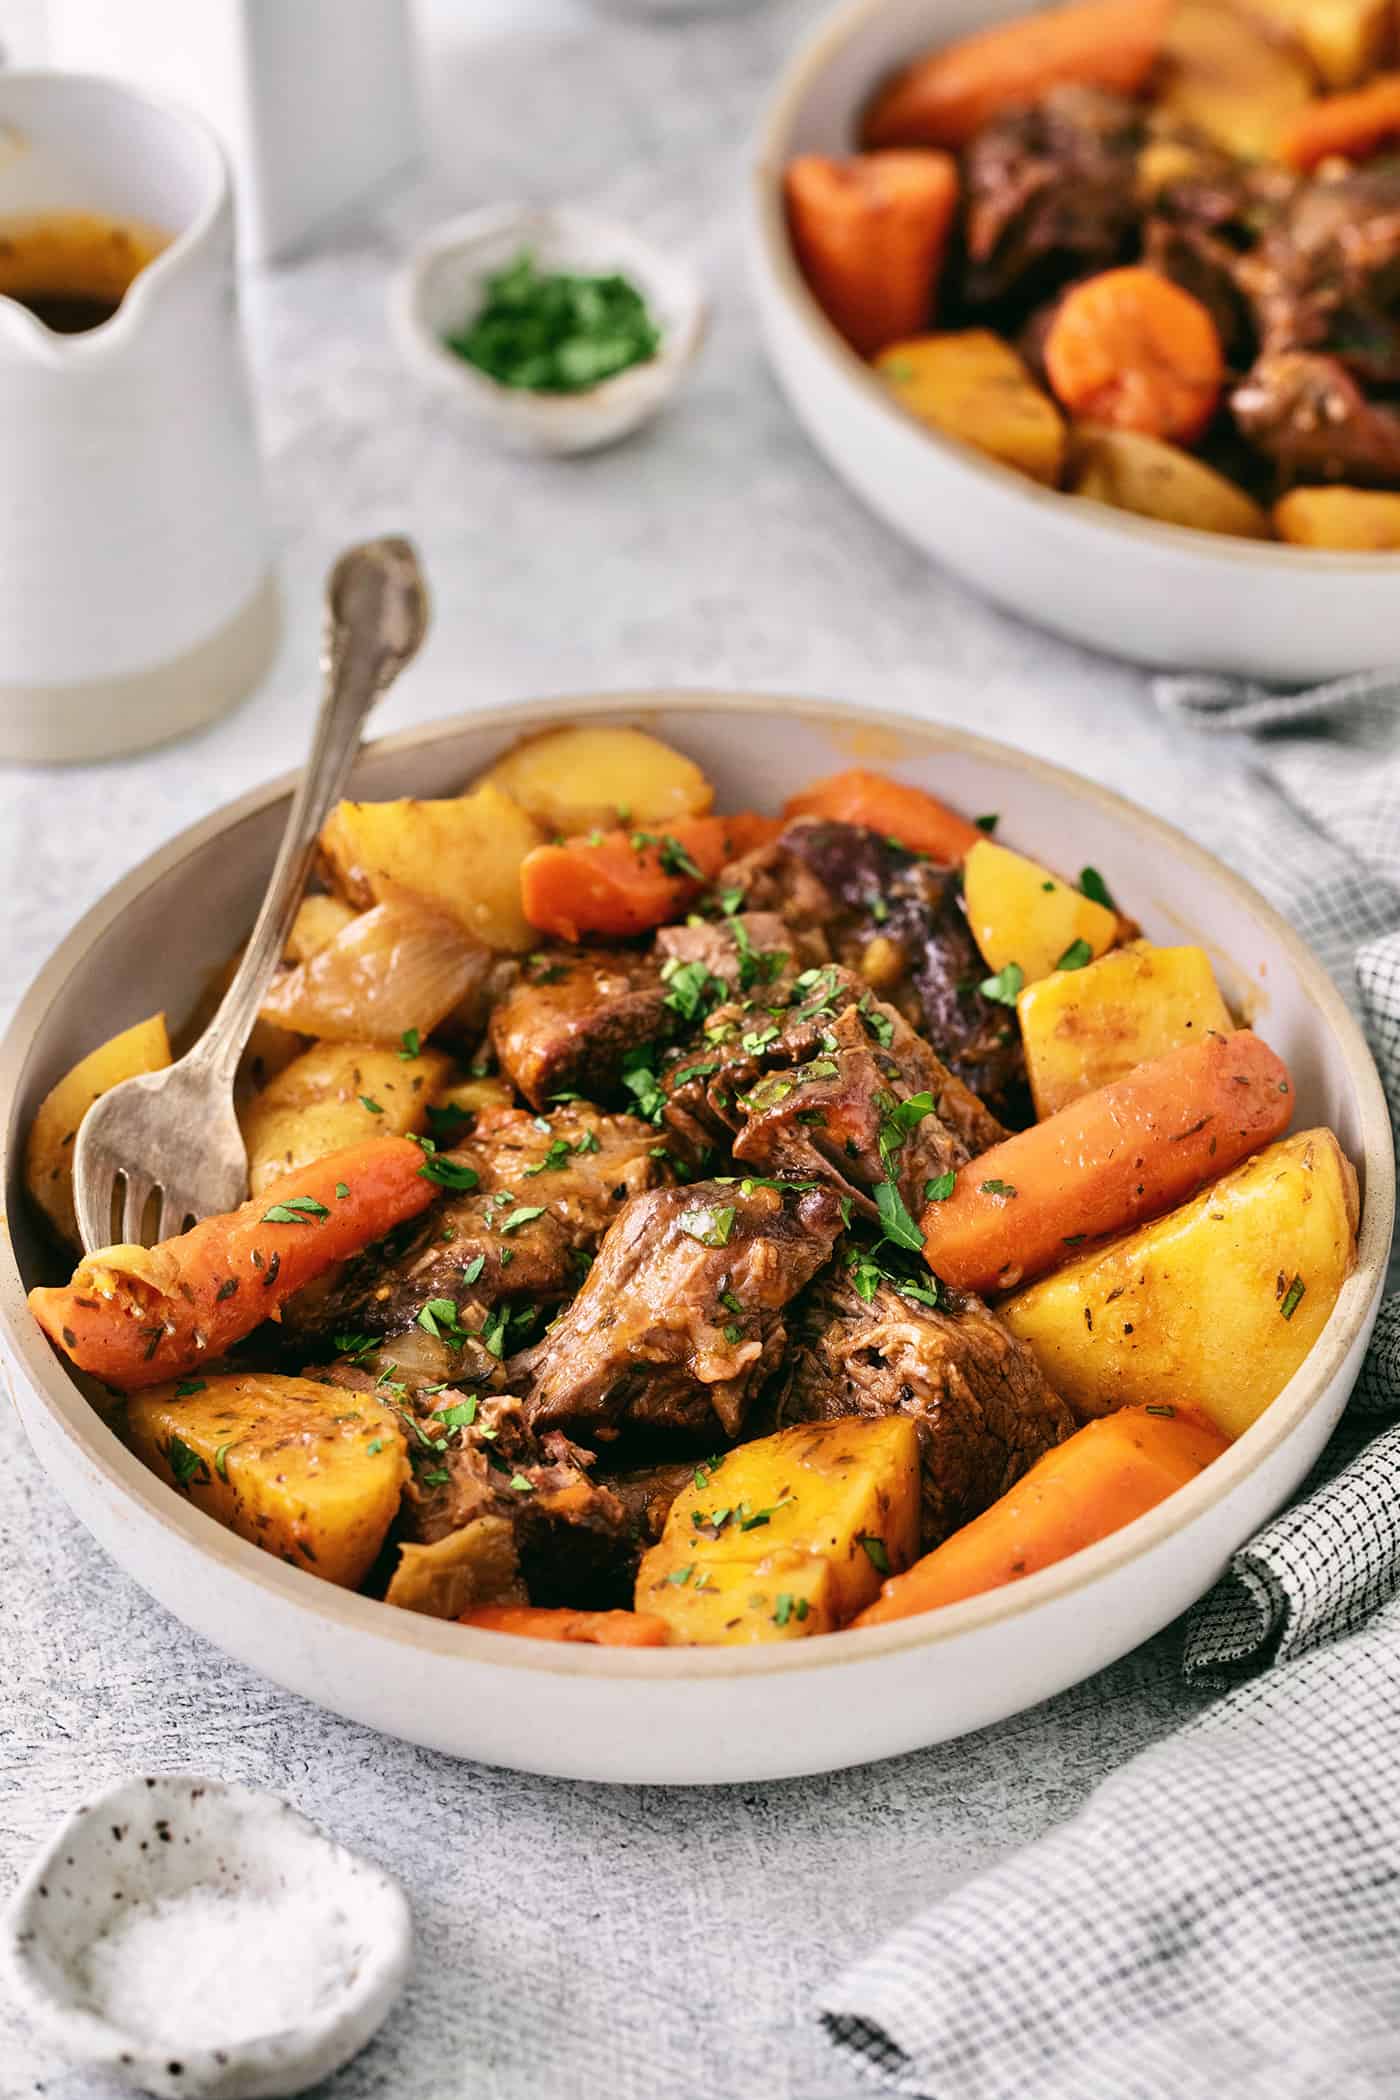 Beef pot roast with potatoes and carrots in a bowl